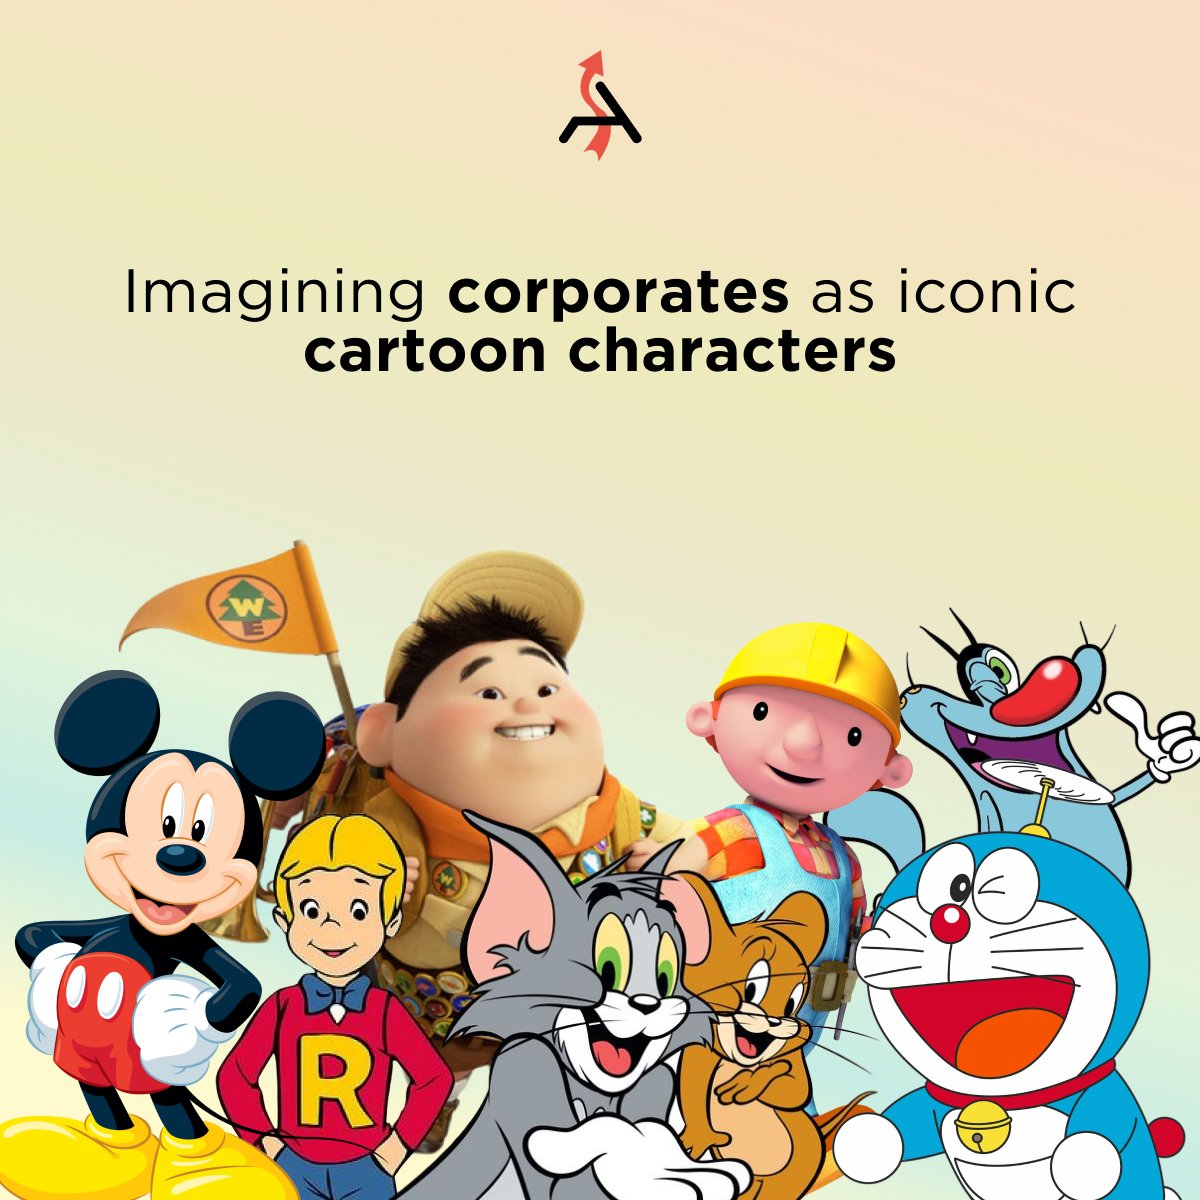 🤨 Meet your Corporate Cartoon Cast, from the energetic manager to the analytical developer! 👩‍💻

Which character most connects with you? 🔍

#CorporateCartoons #OfficeLife #WorkplaceCulture
#MeetTheTeam #CorporateCharacters 
#cartoon #fun #Devloper #HR #meme #agileinfoways